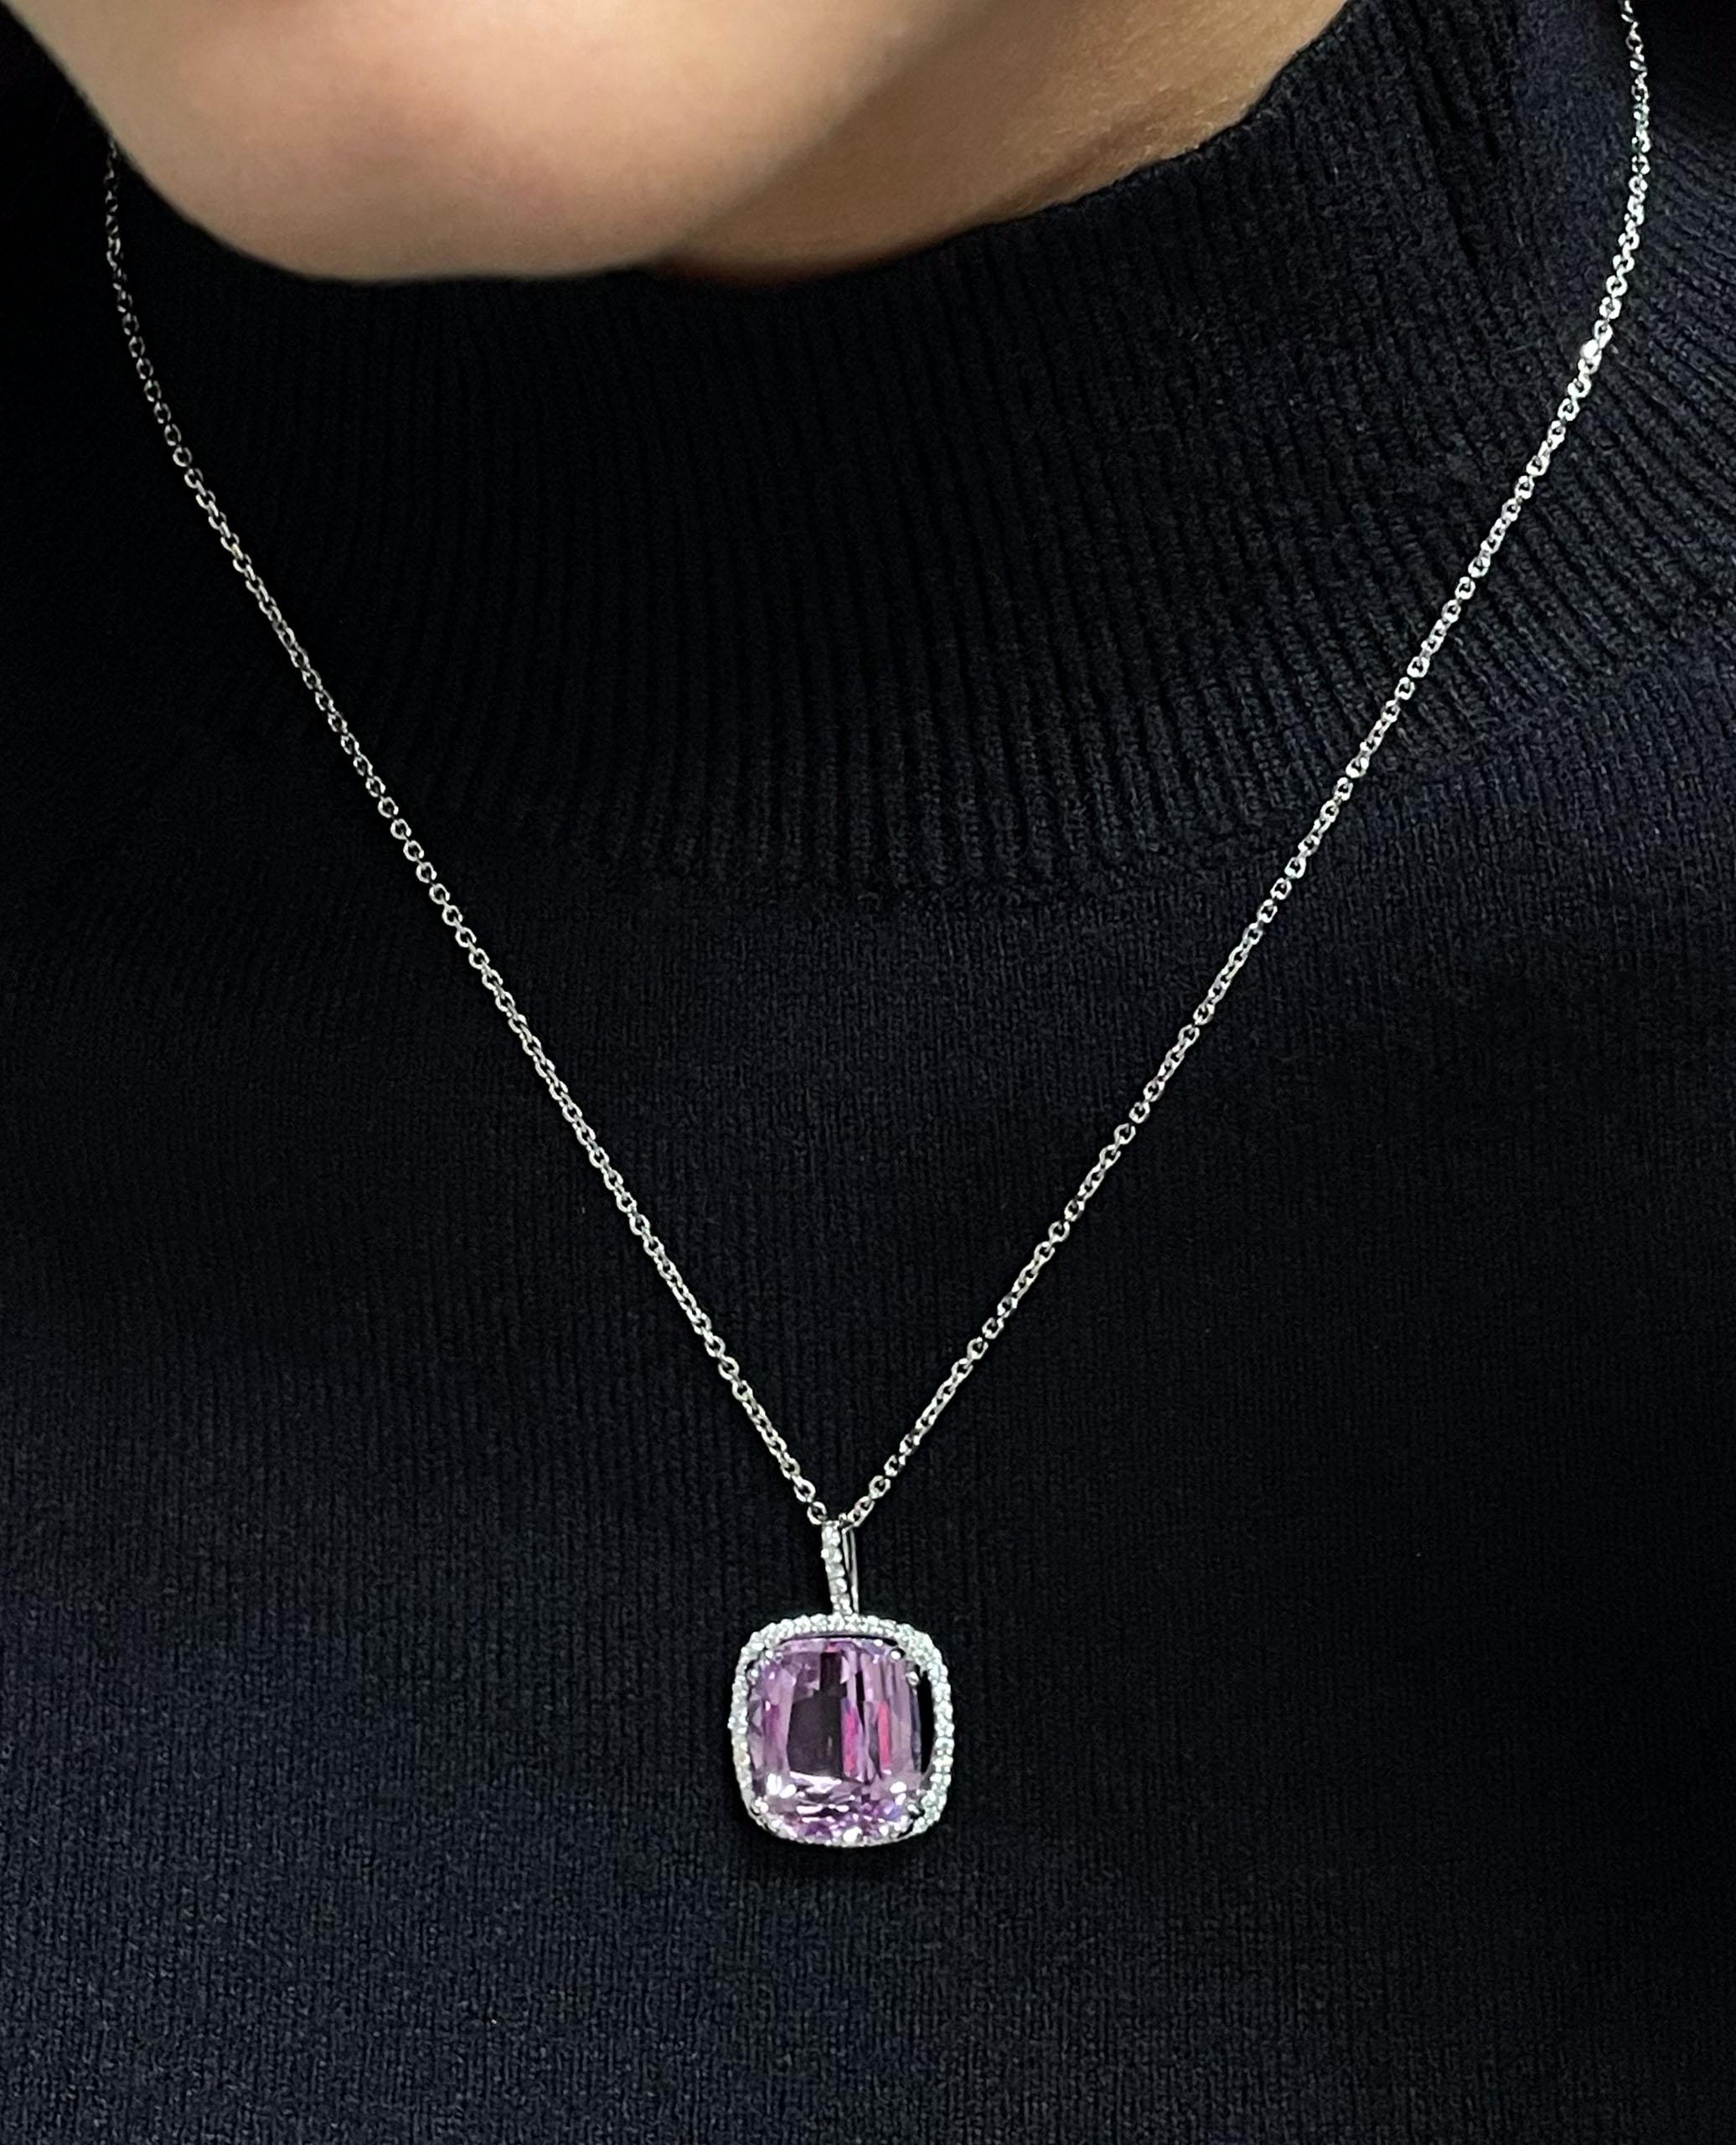 14K white gold cushion shape pendant necklace with 41 round diamonds 0.35 carats total and one center cushion shape kunzite 17.40 carats. The pendant slides on a 18 inch diamond cut cable chain.

- Diamonds are G/H color, SI clarity
- Kunzite